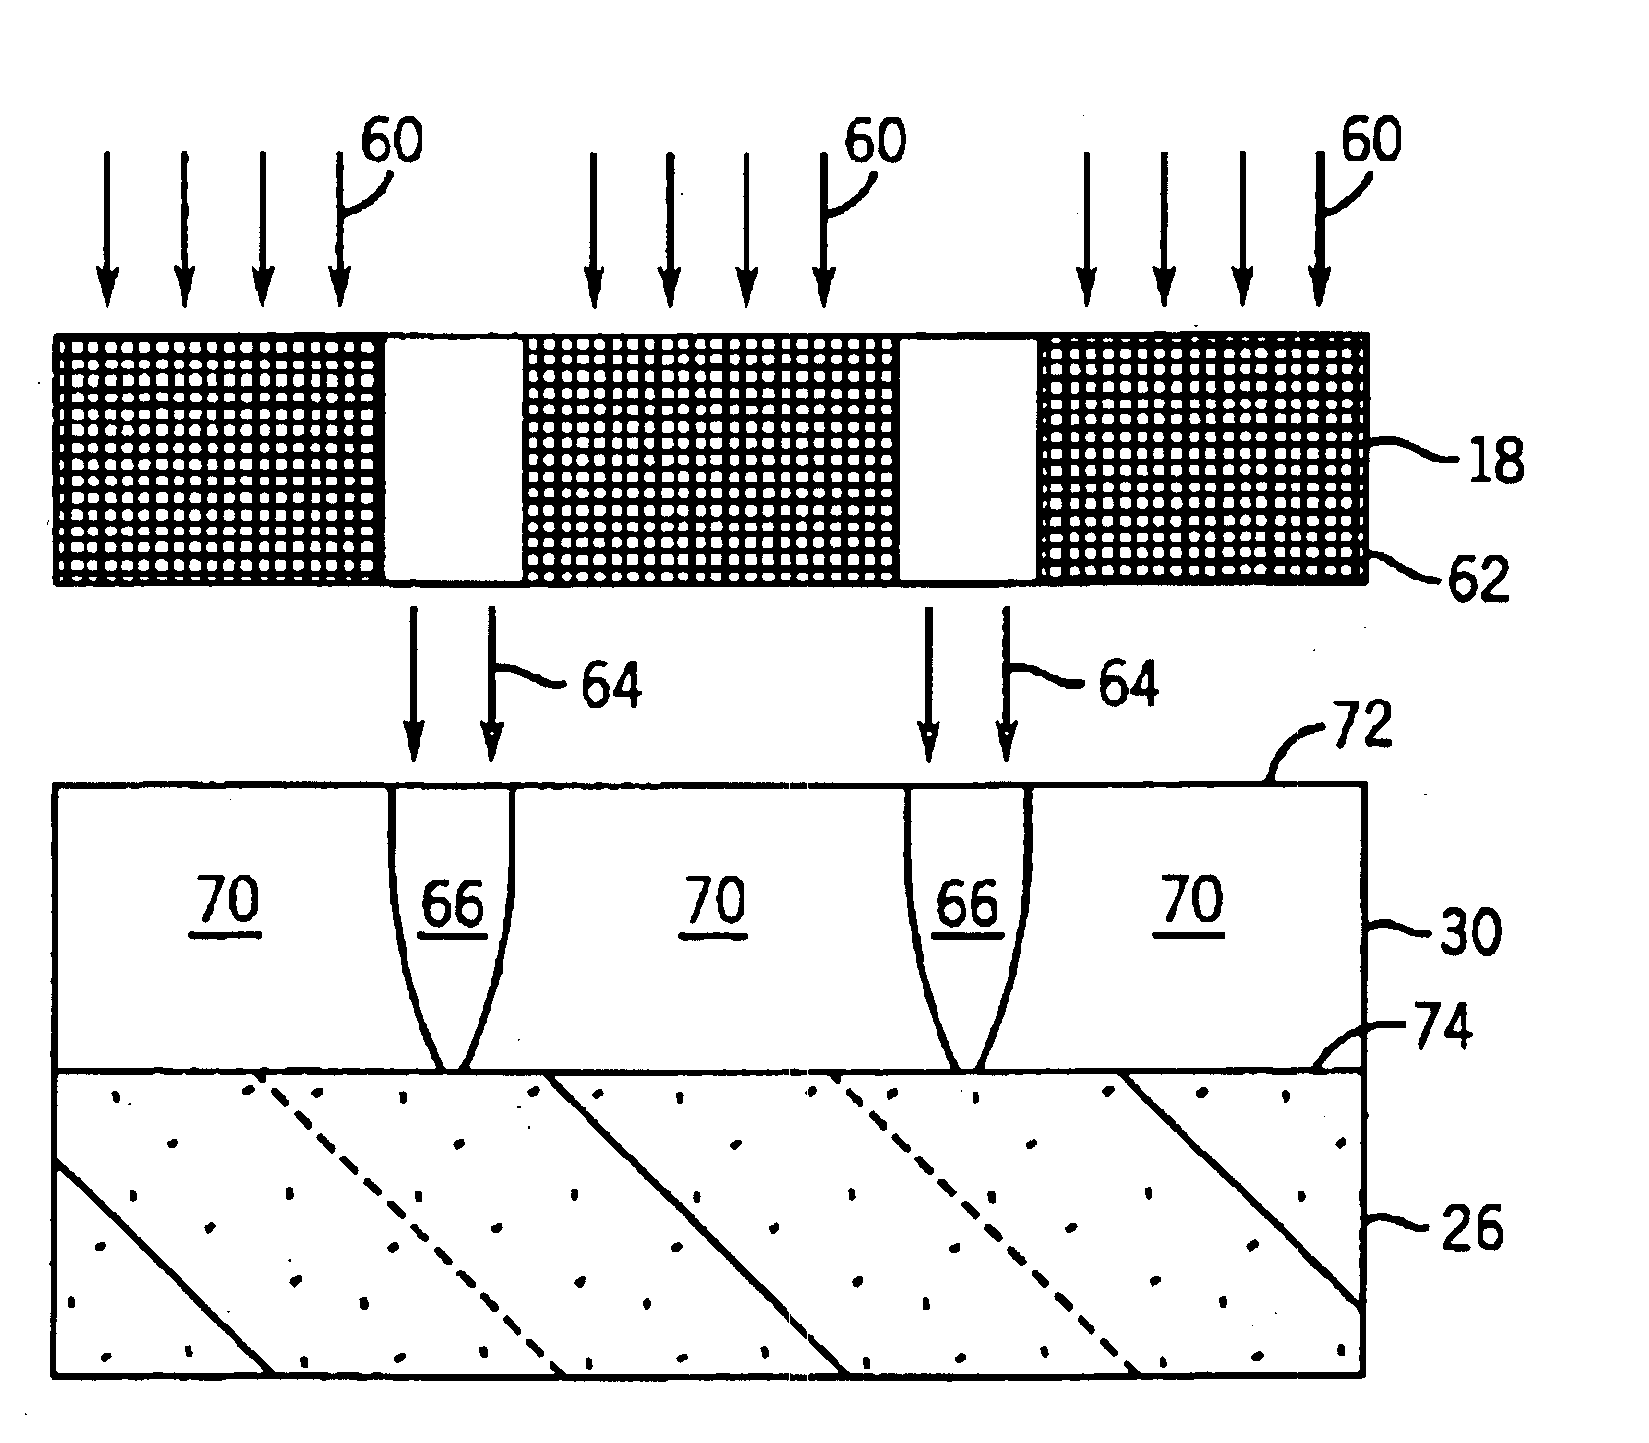 Materials and methods for sublithographic patterning of gate structures in integrated circuit devices